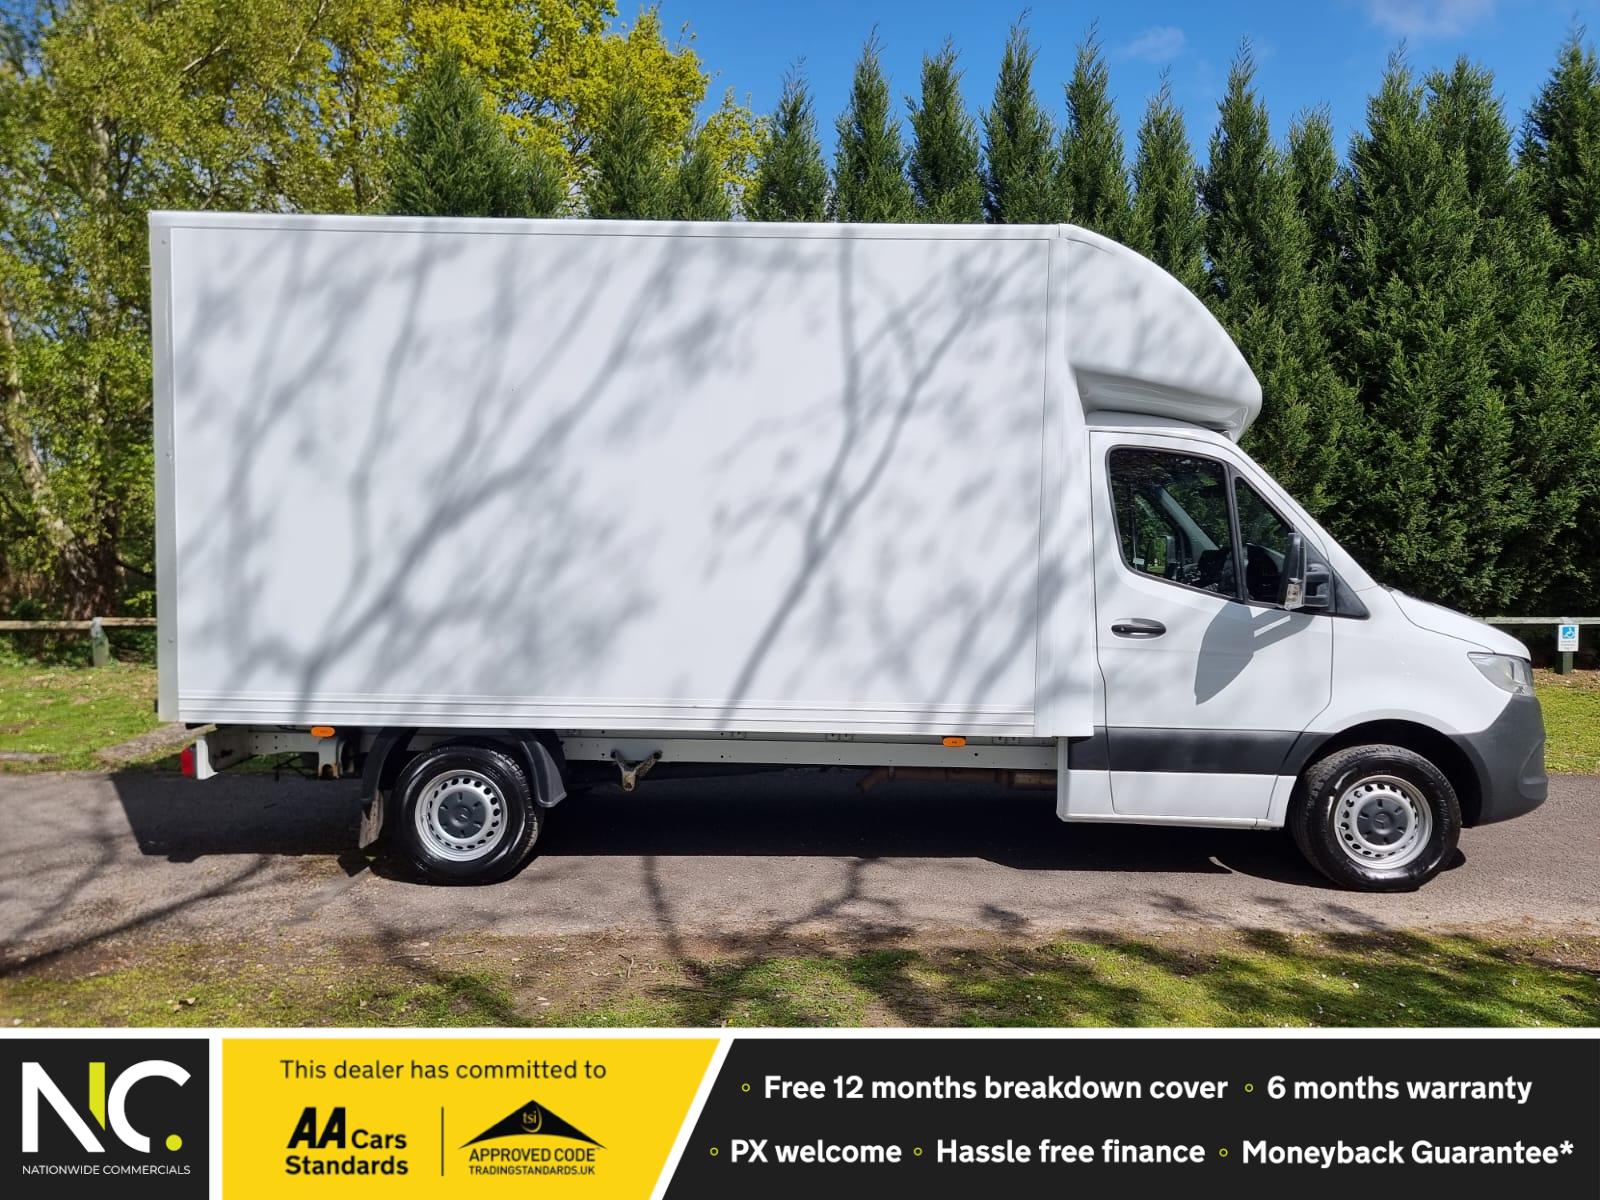 Mercedes-Benz Sprinter 2.1 RWD 316 CDI Luton Van (163 ps) Diesel Manual ⭐️ Euro 6 ⭐️  One Owner ⭐️  Finance Available